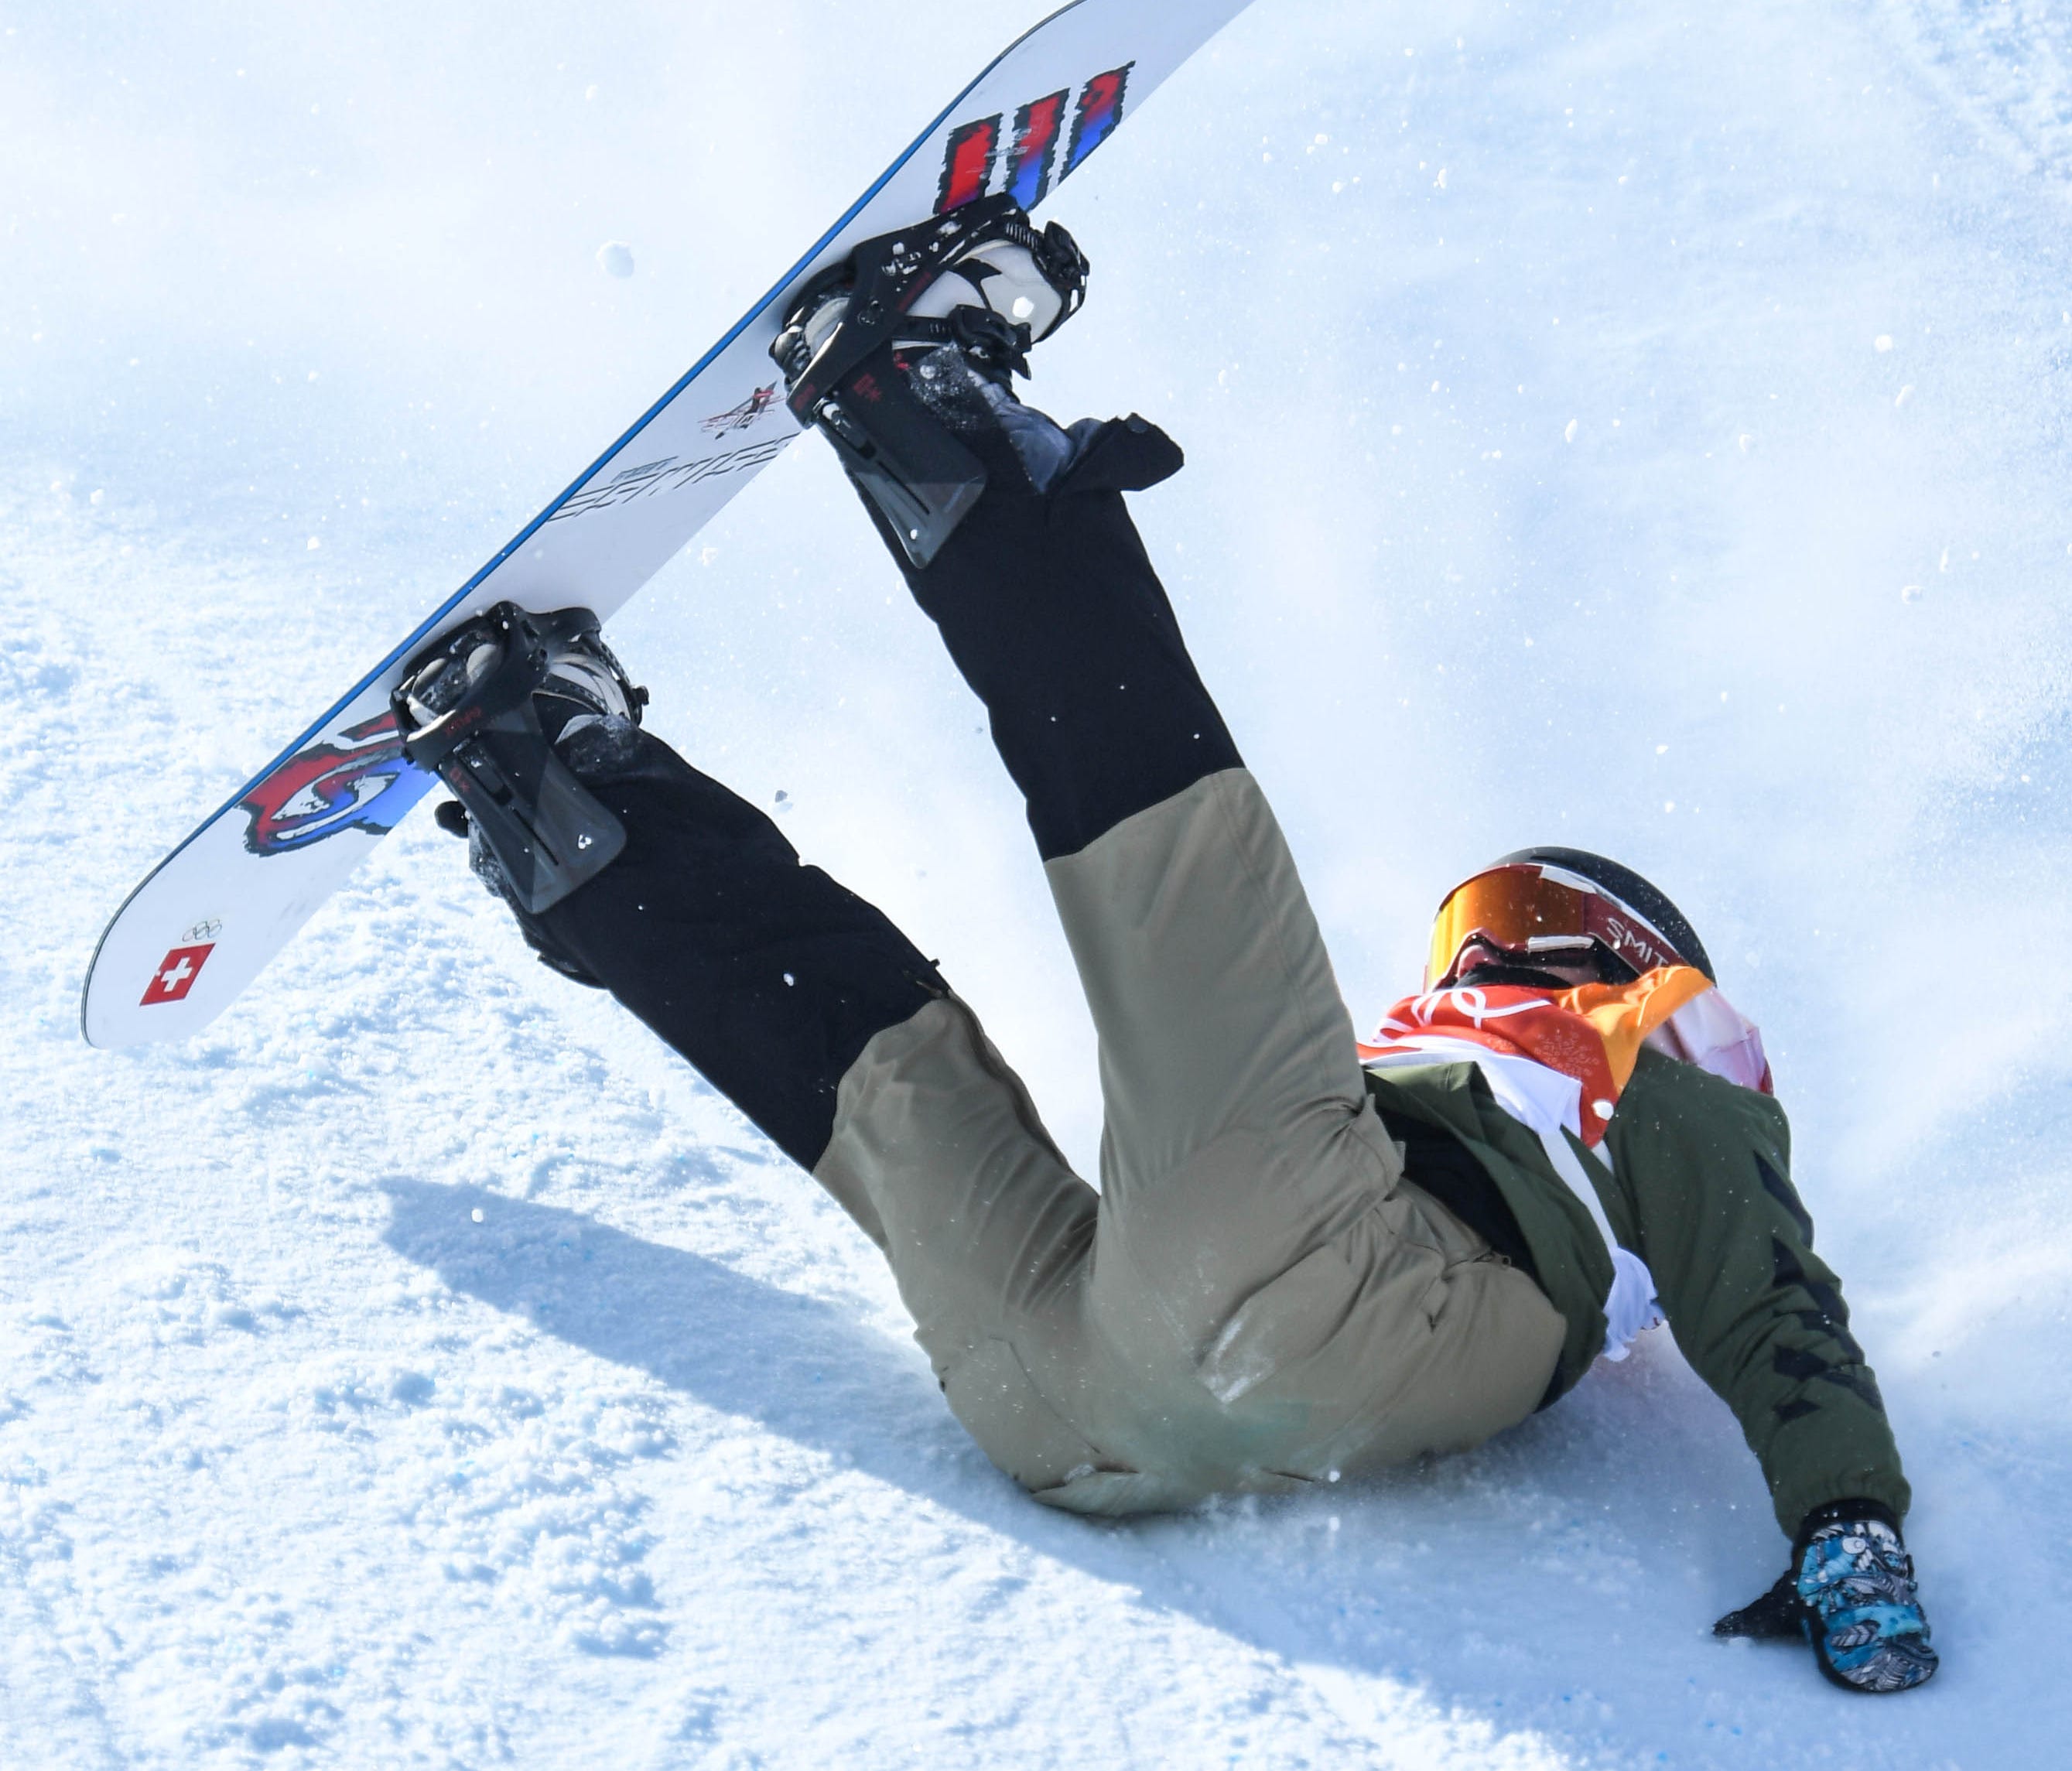 Carla Somaini of Switzerland crashes during her first run in the snowboard slopestyle competition.